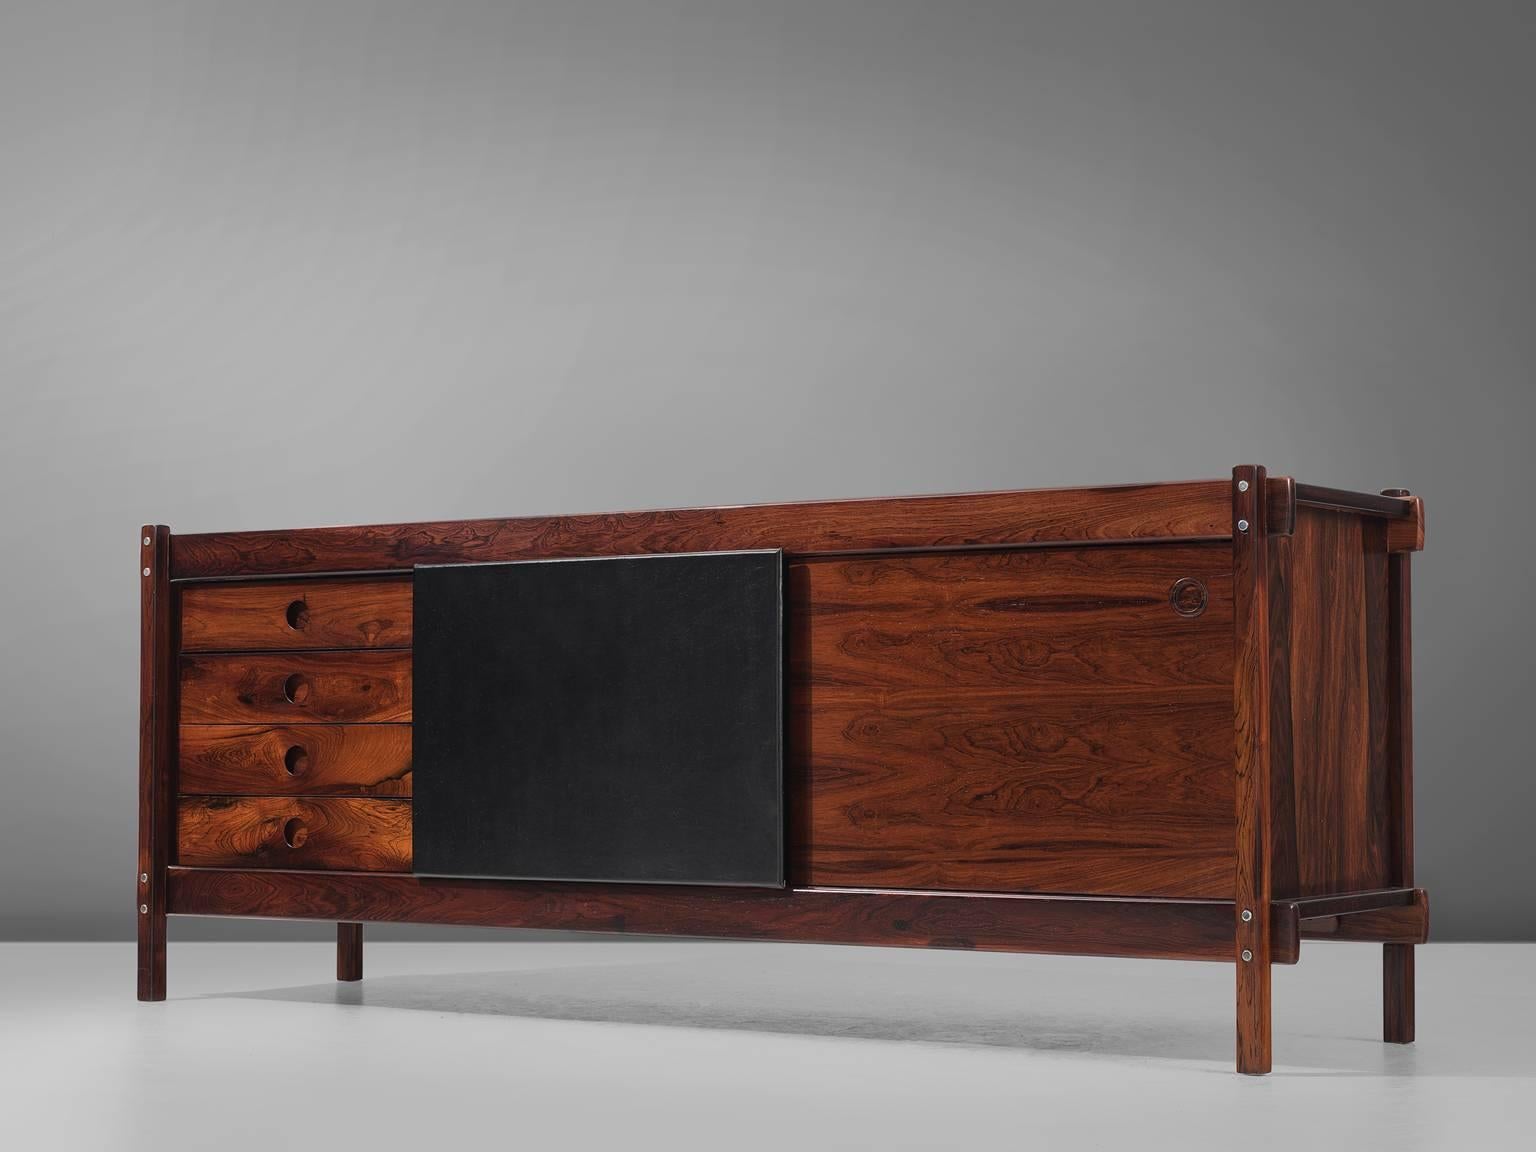 Sergio Rodrigues, Buffet, rosewood and leather, Brazil, 1965.

This is a wonderful example of Brazilian modern furniture. Sturdy, warm and of supreme qualities in both material and craftsmanship. This small credenza has four drawers and two sliding